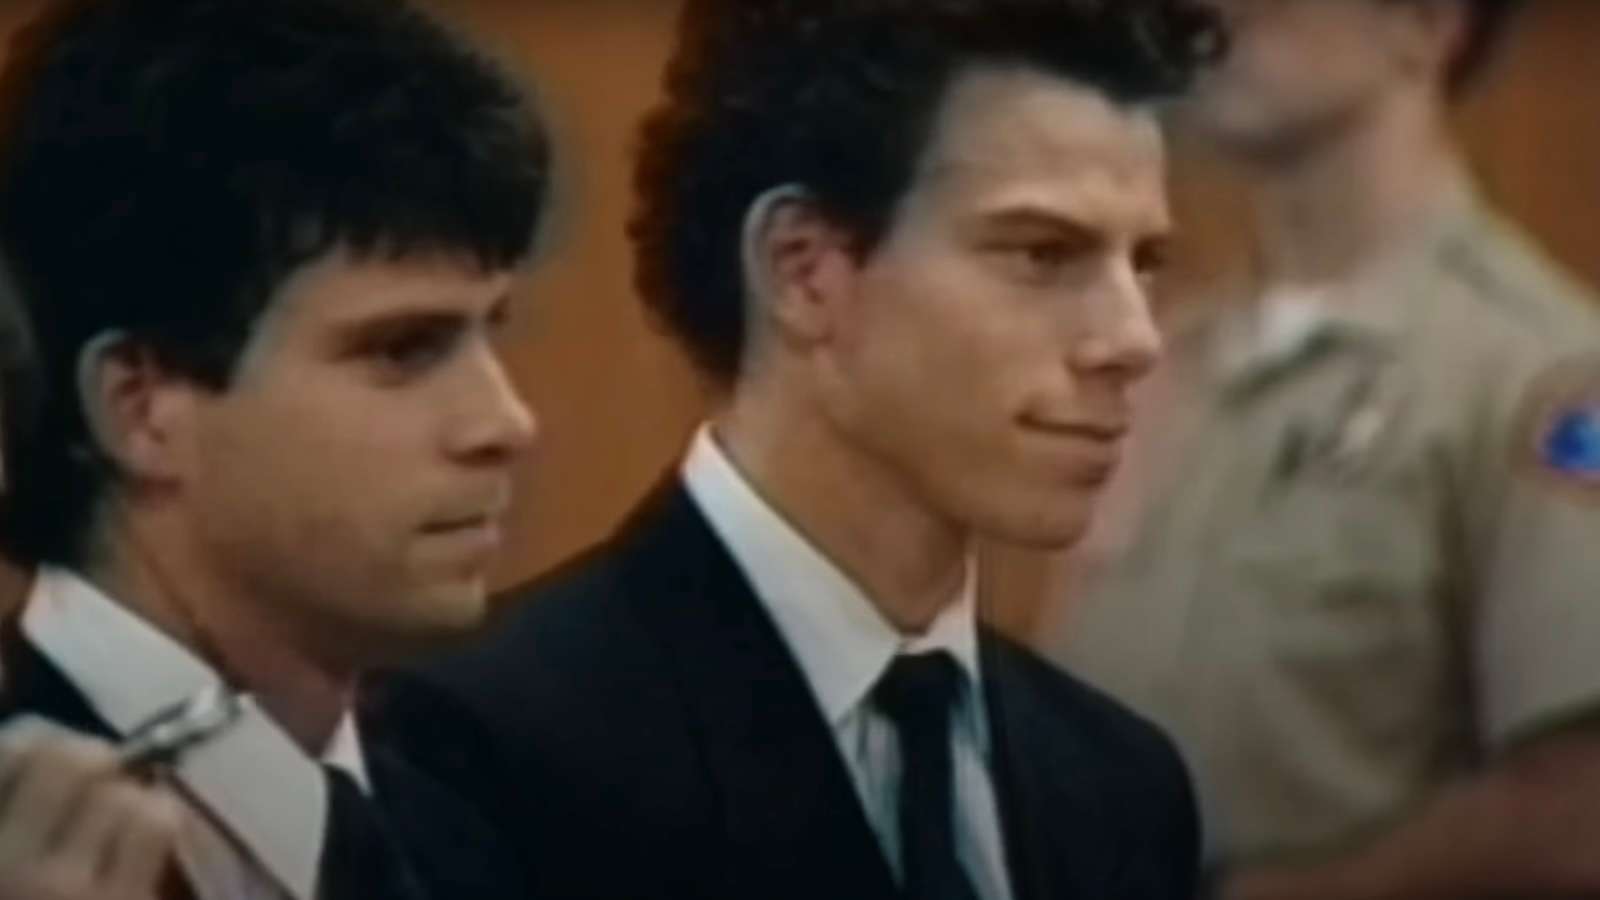 Lyle and Erik Menendez on trial, as shown in The Crimes that Changed Us: The Menendez Brothers